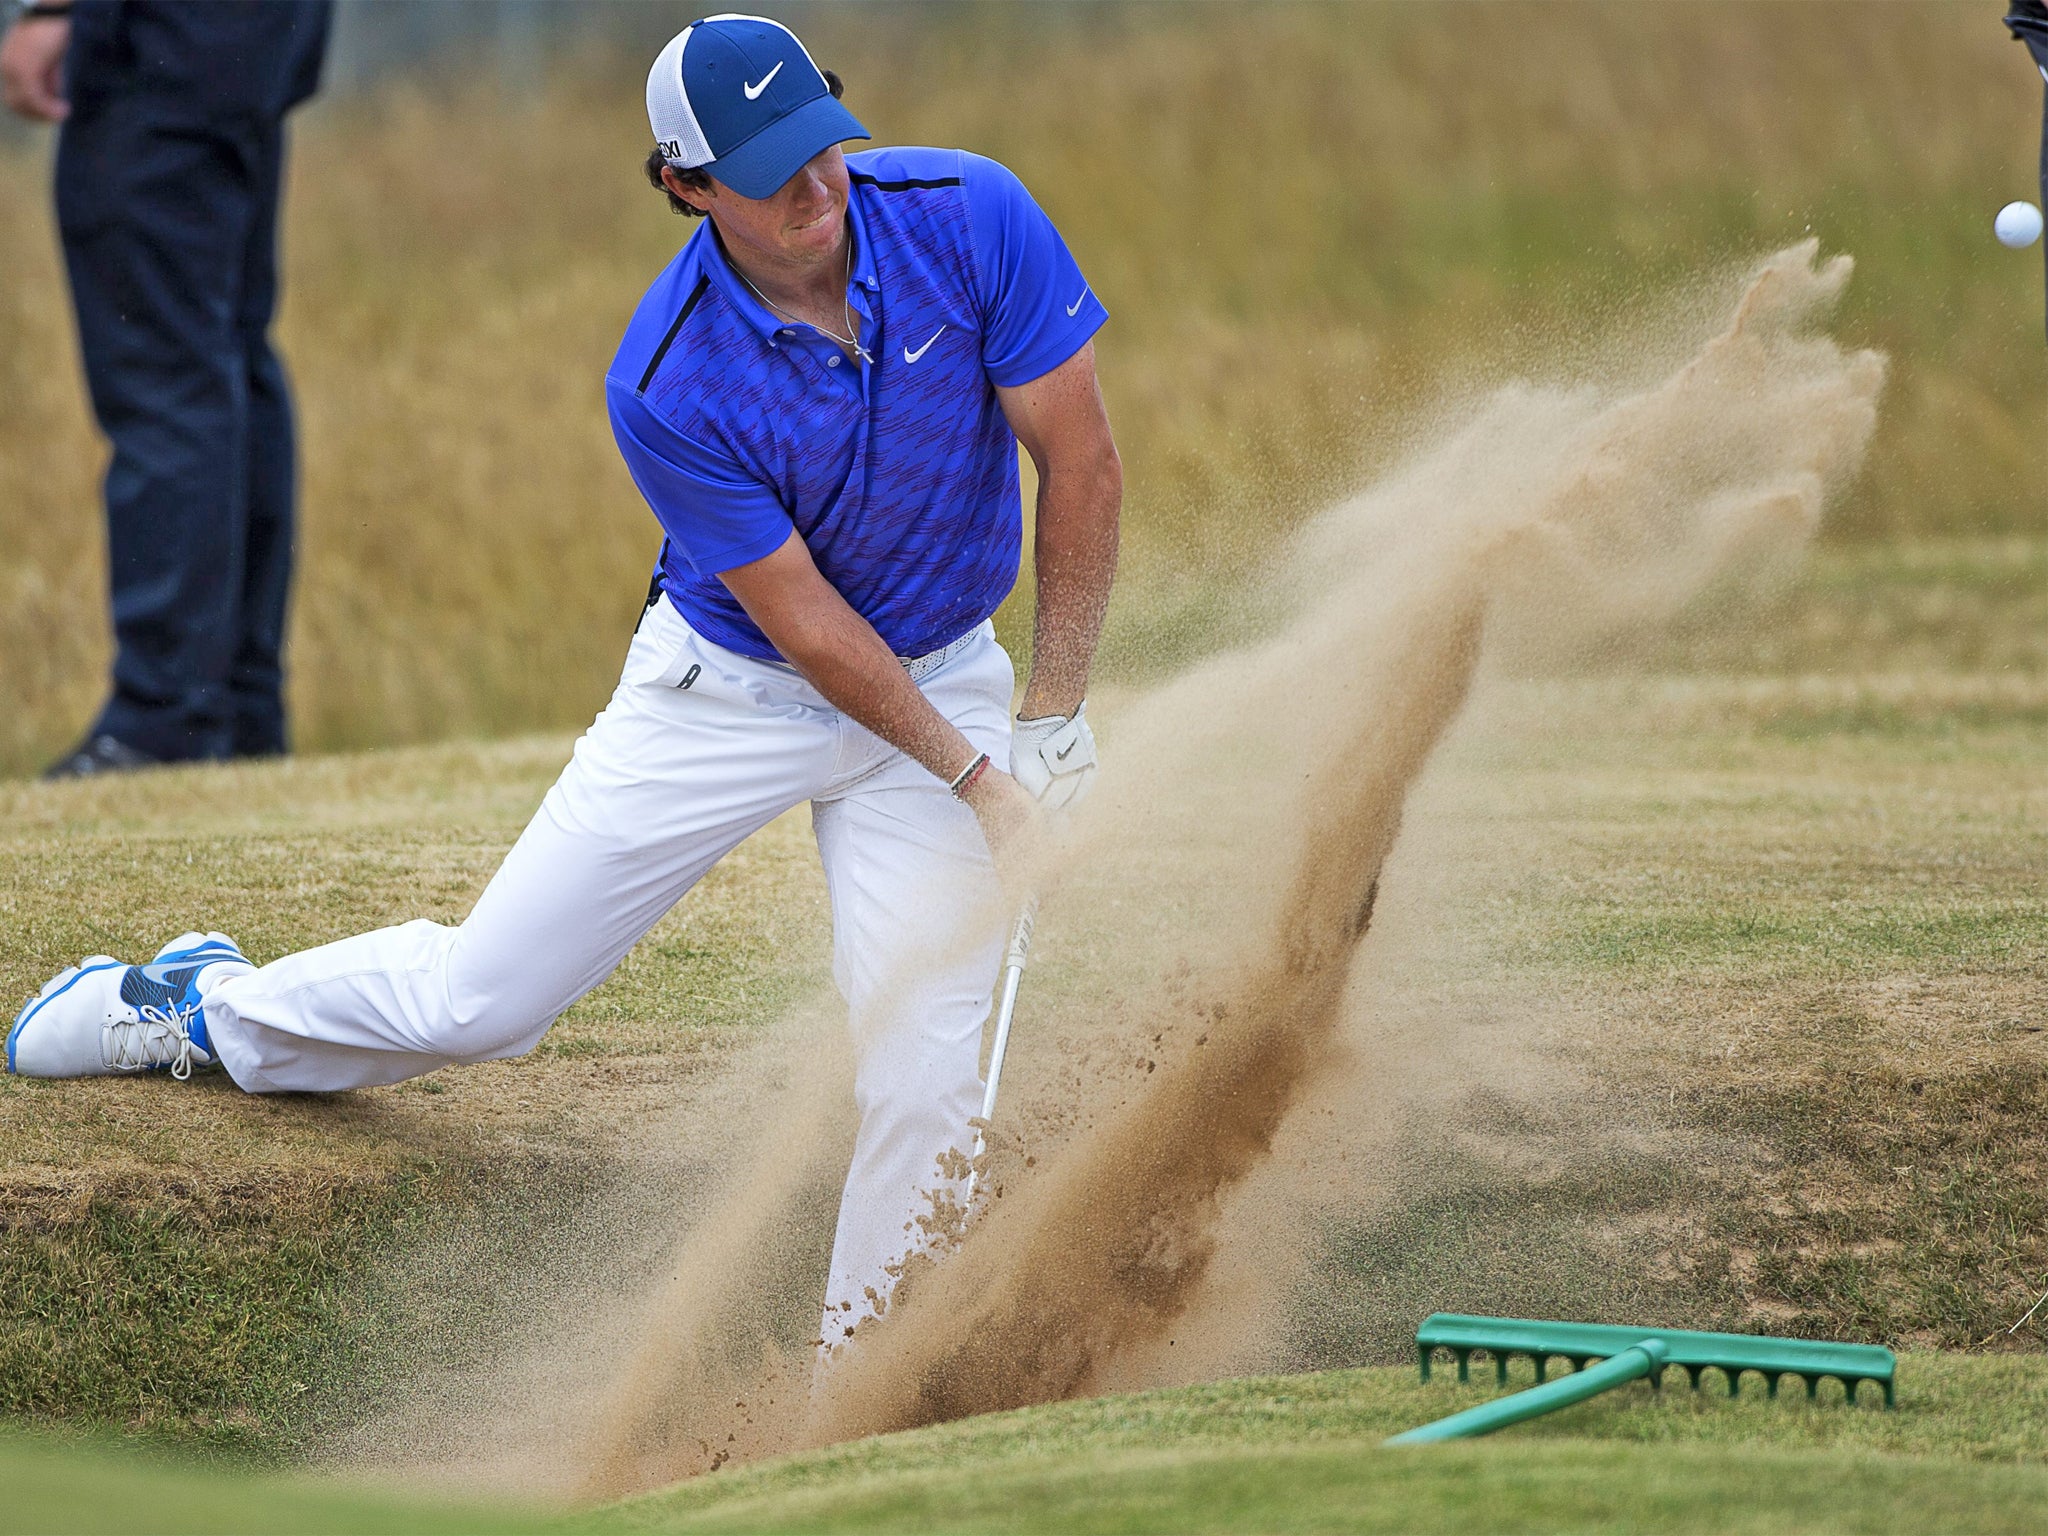 Rory McIlroy pops out of the bunker during practice